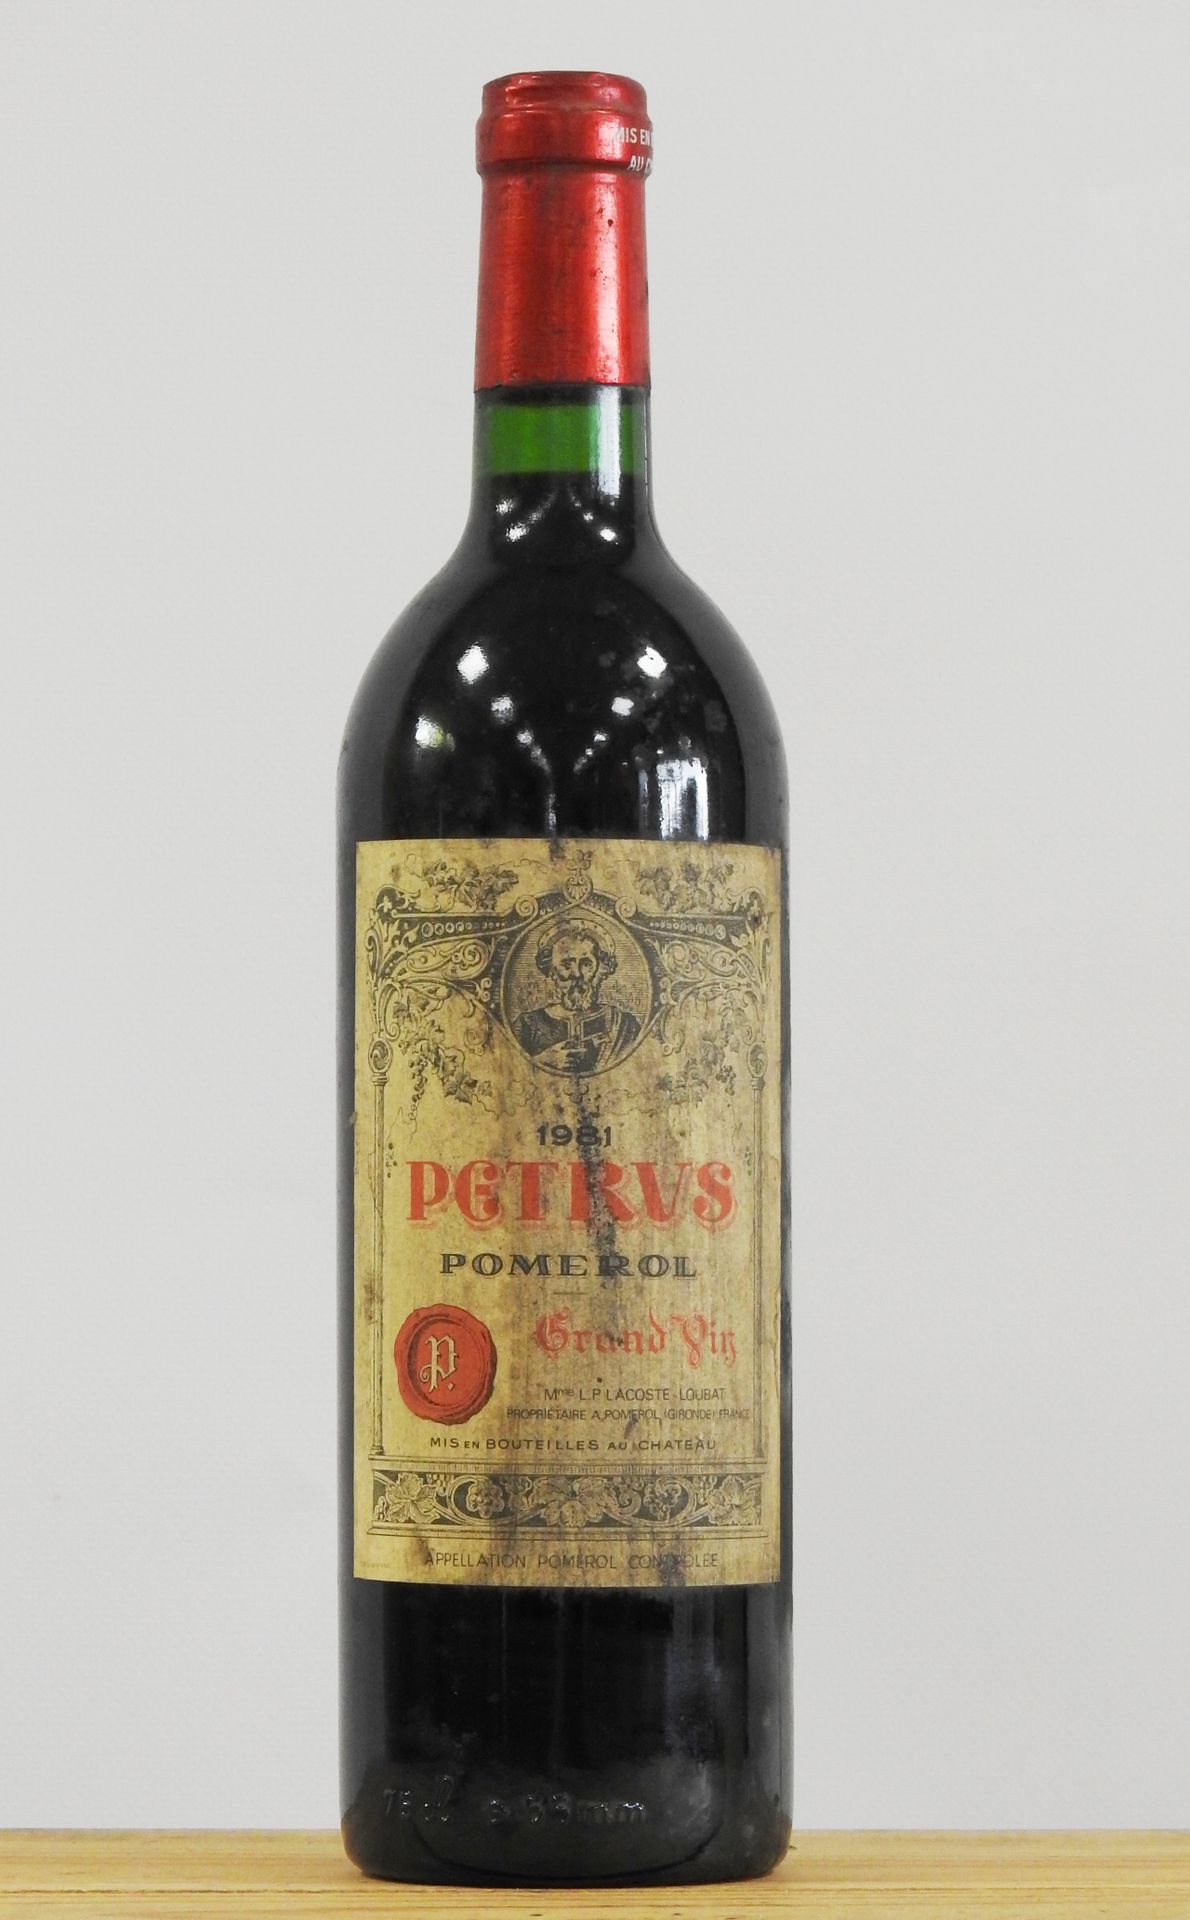 Null 
1 bottle

Petrus

1981

Pomerol

Good level

Stained label, worn, worn cap